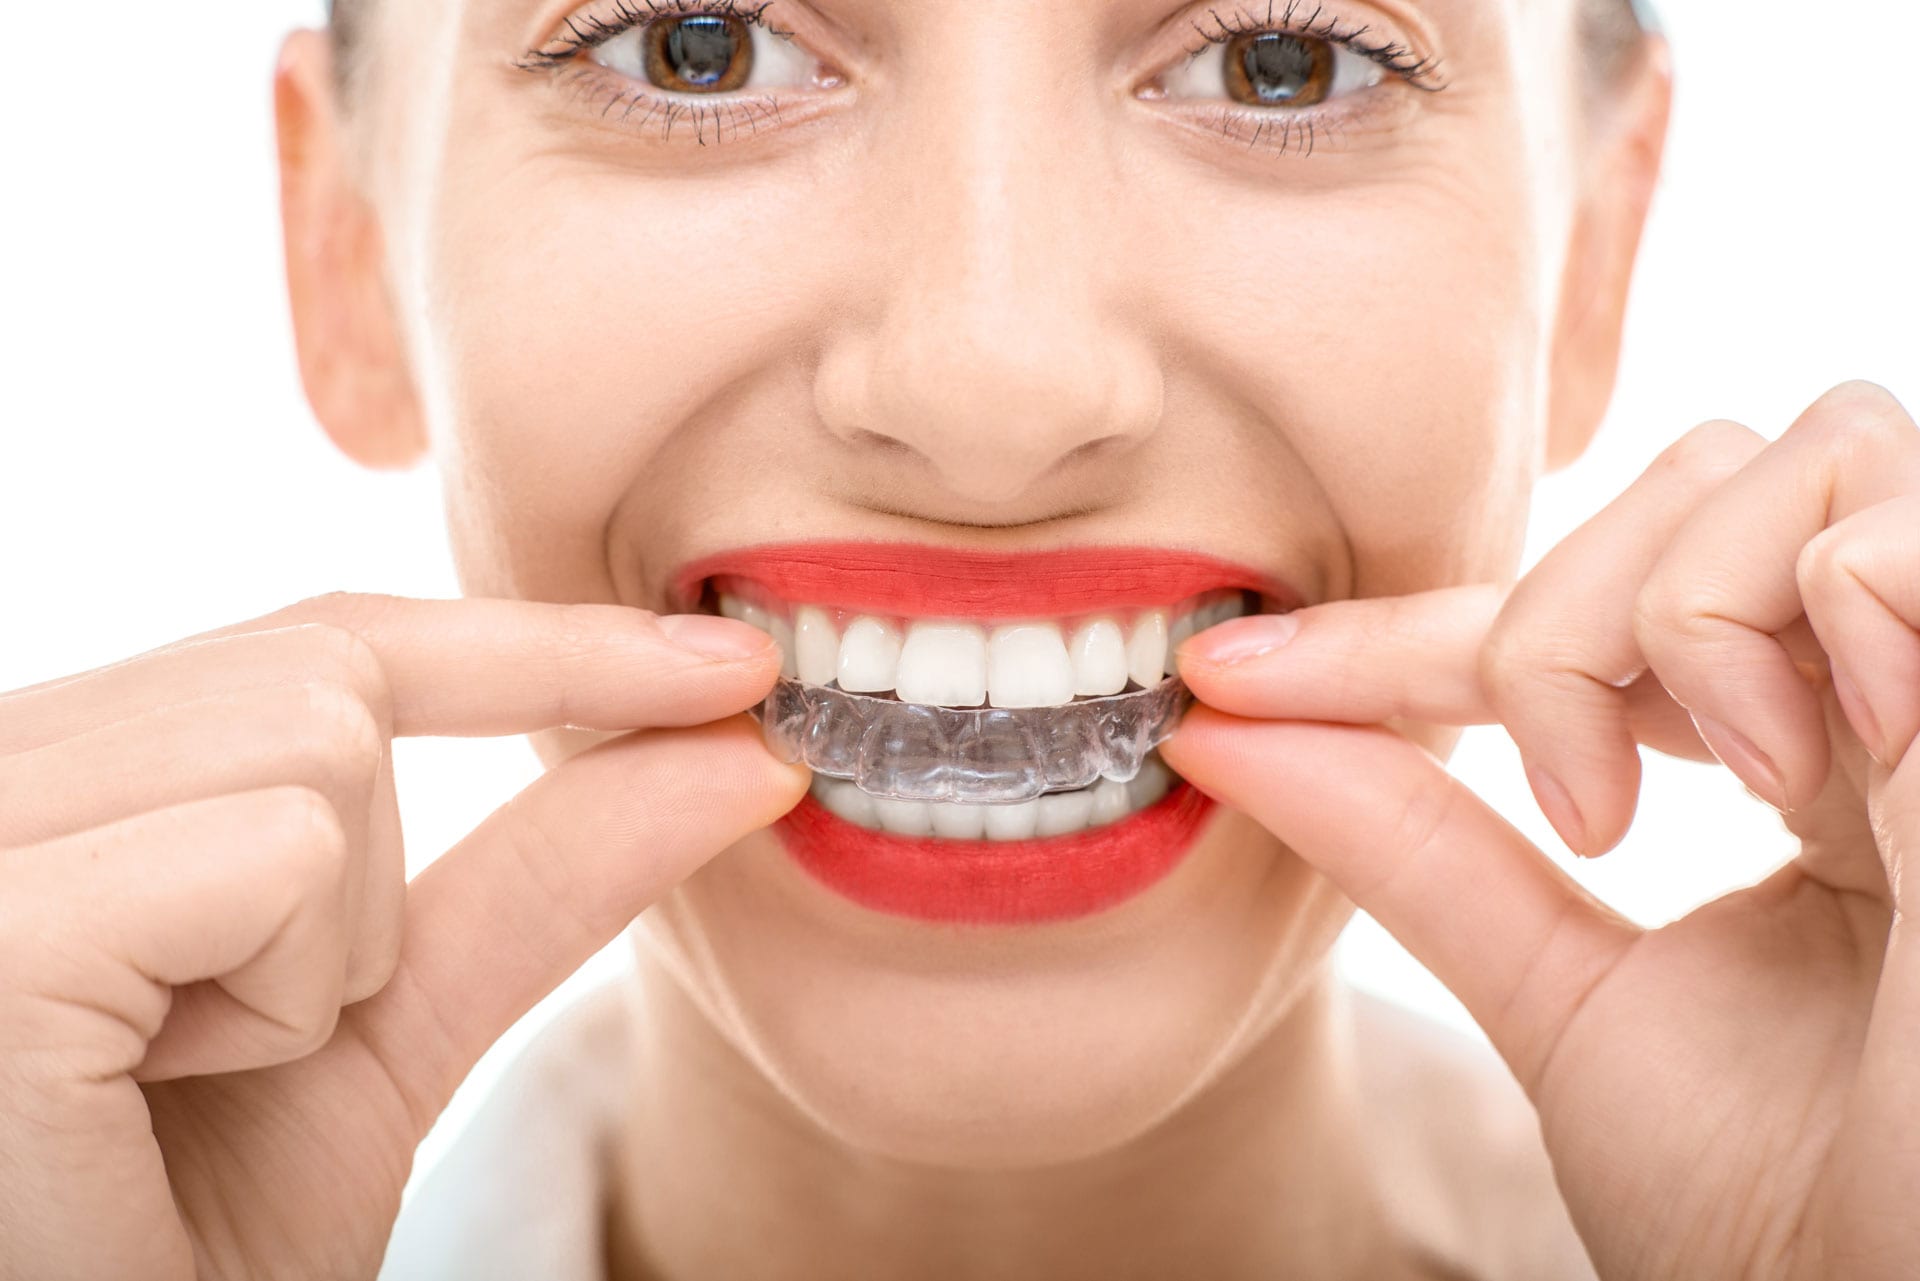 Dr. Payne Teaches You the Best Way to Clean Your Invisalign